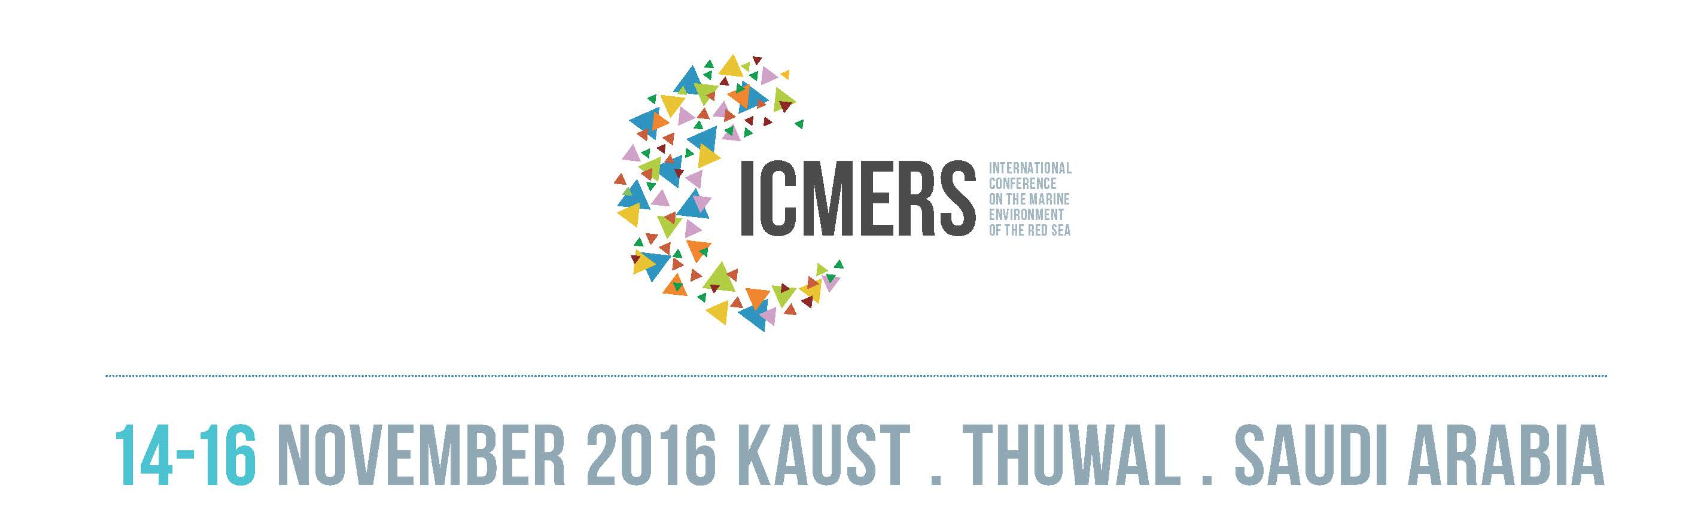 ICMERS-2016-Banner